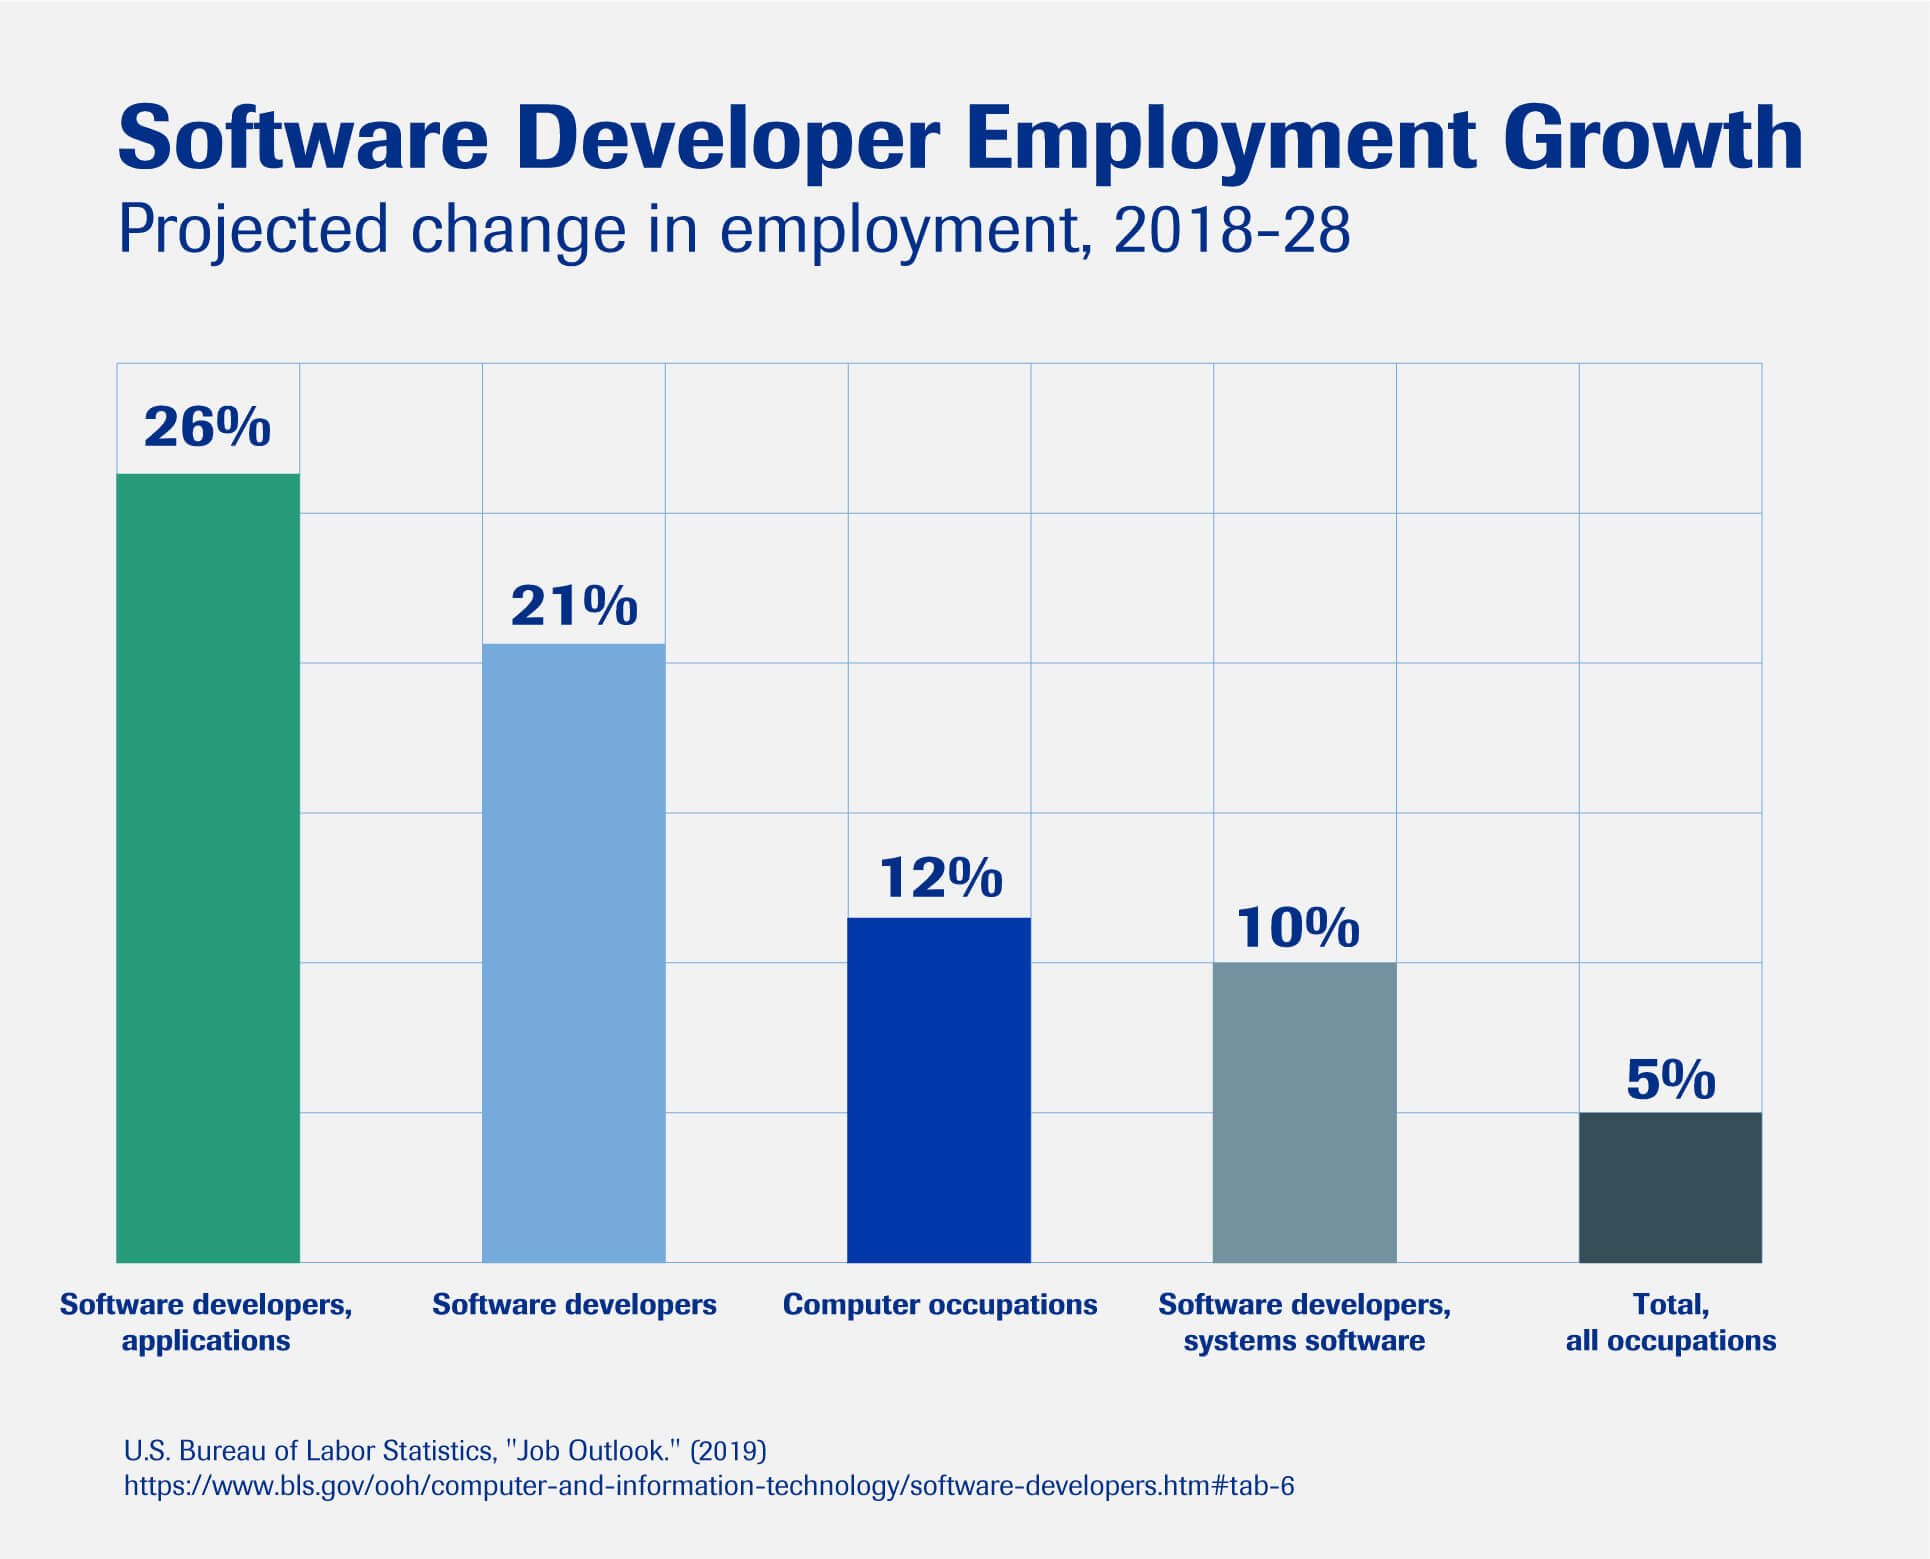 A chart showing the projected employment growth for software developers